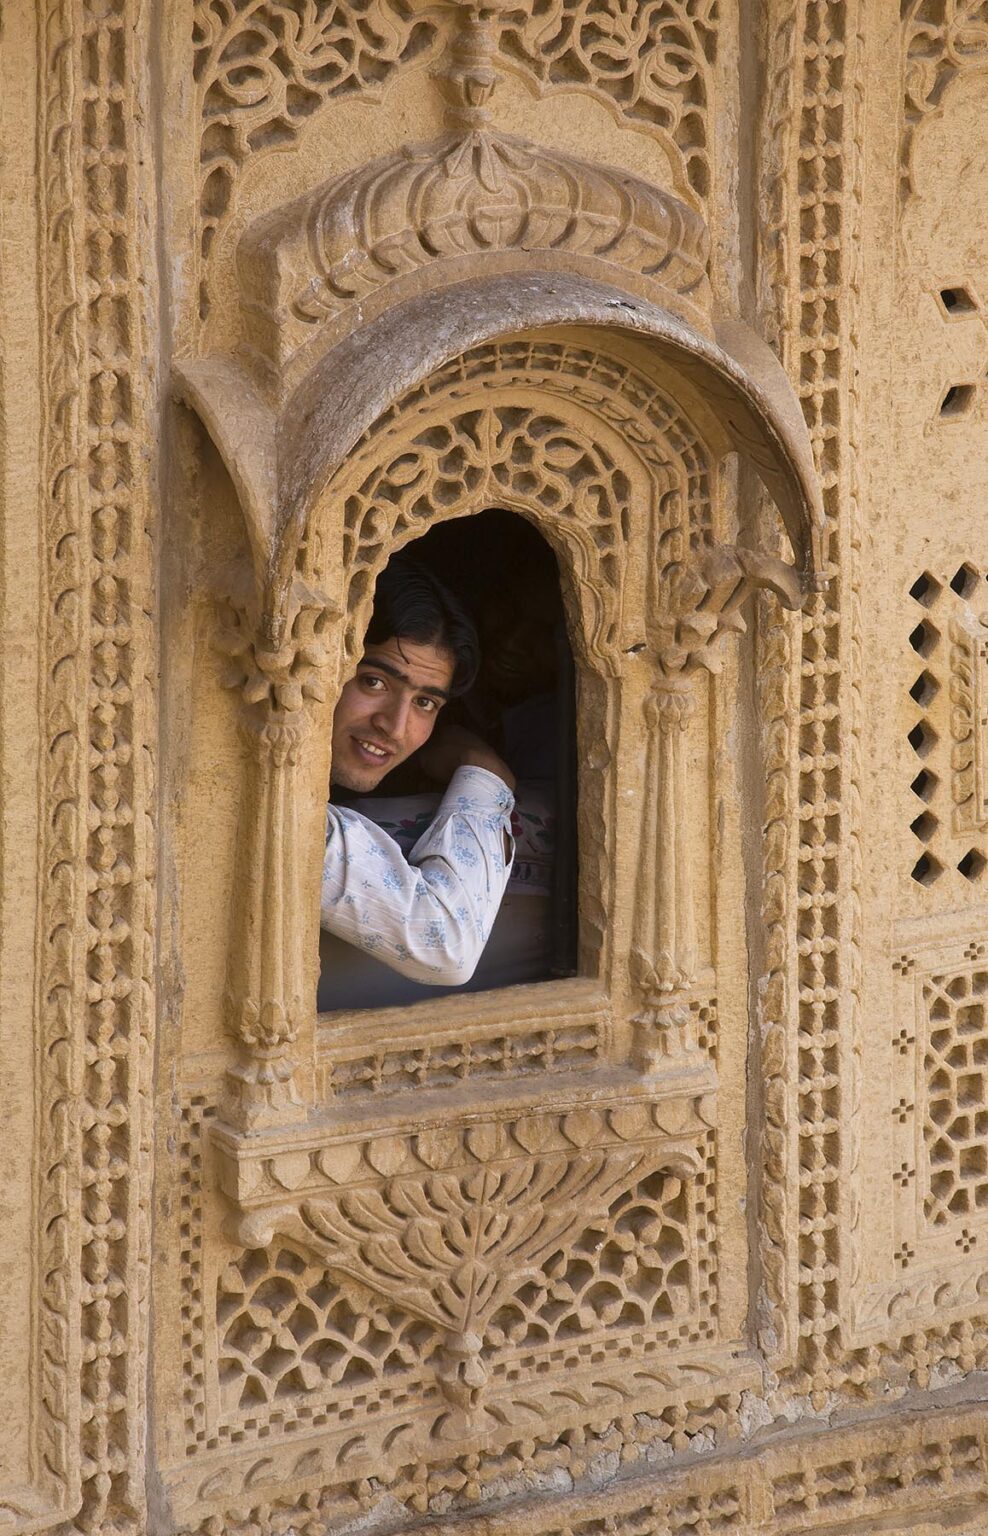 An Indian boy looks out a hand carved sandstone WINDOW in the MAHARAJA'S PALACE located inside JAISALMER FORT - RAJASTHAN, INDIA